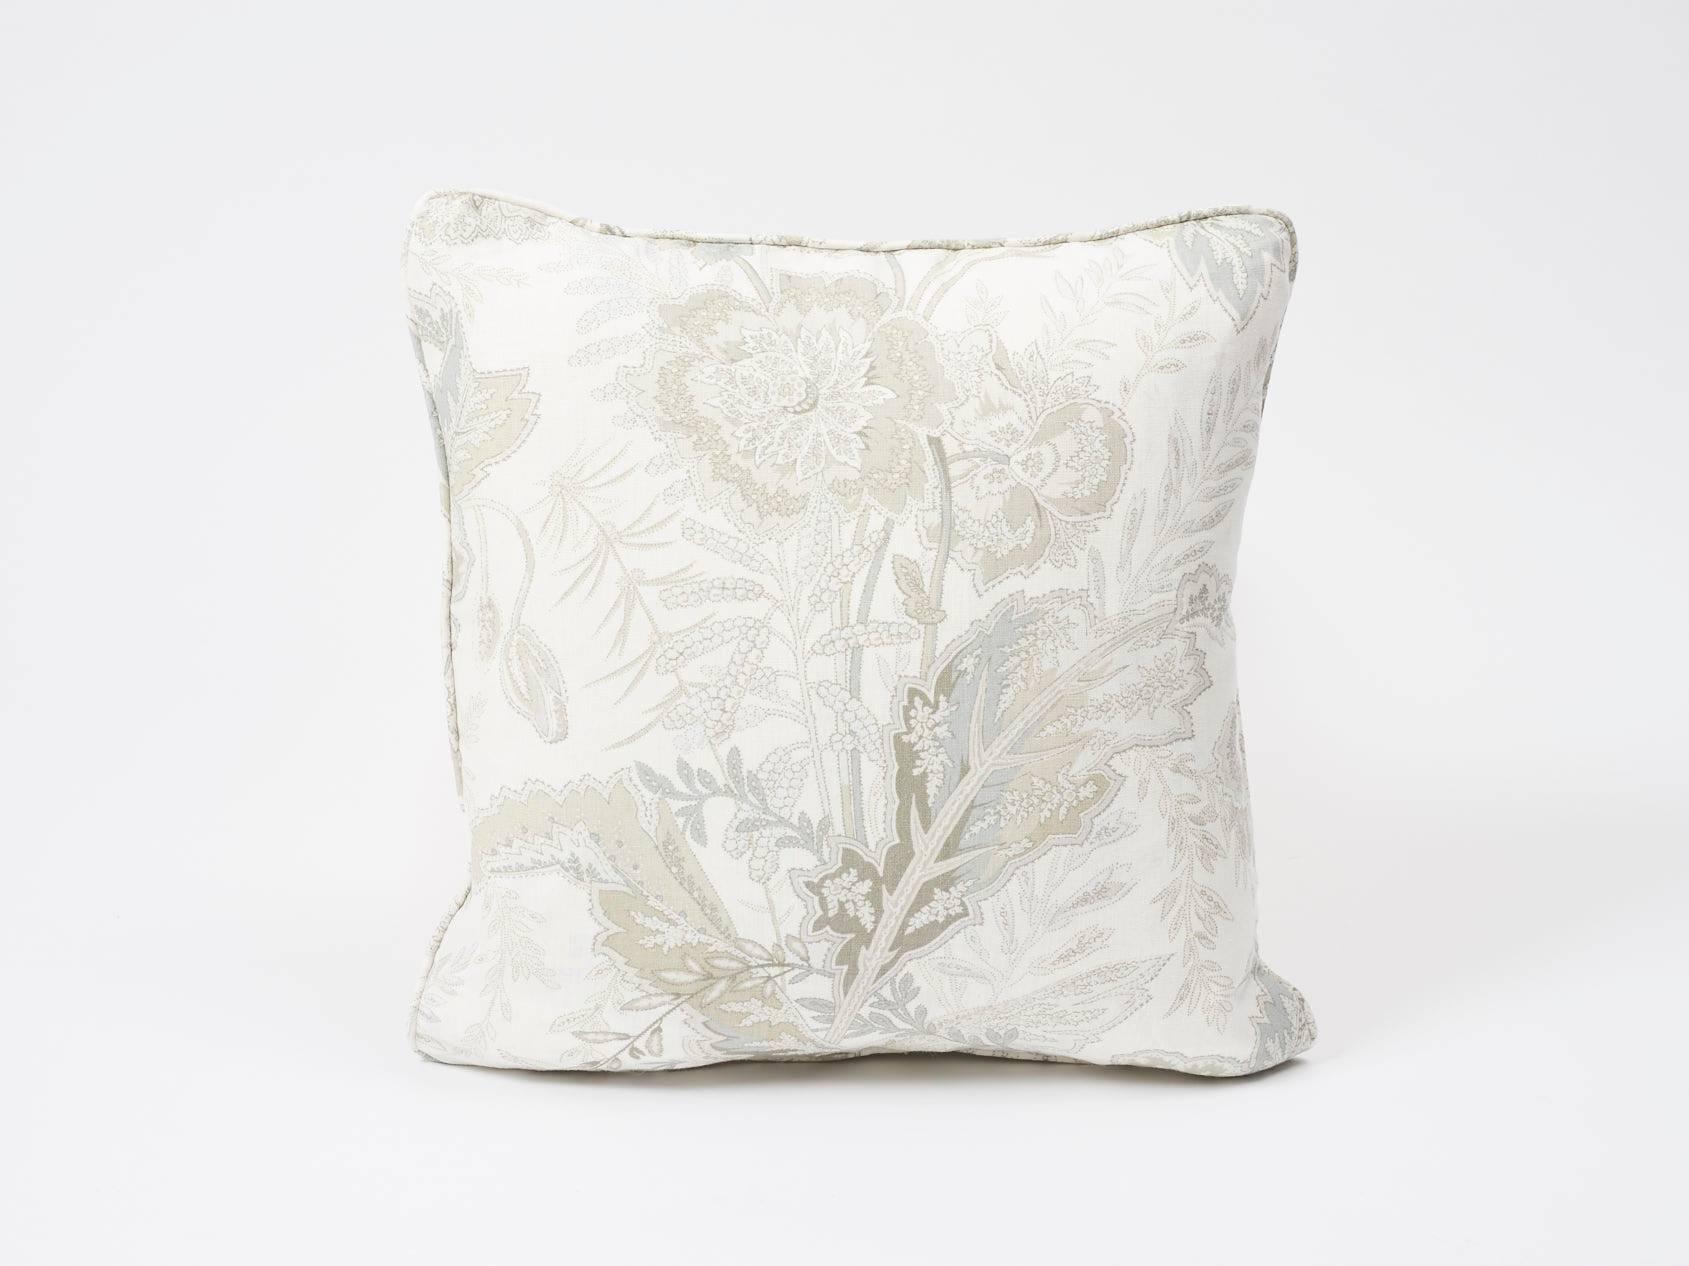 Based on a 19th century French Indienne print and reinterpreted on a fine linen ground, the all-over Sandoway Vine floral motifs are graphic yet delicate. This Schumacher Classic design echoes paisley‚Äôs exotic patterning. Featured as a decorative